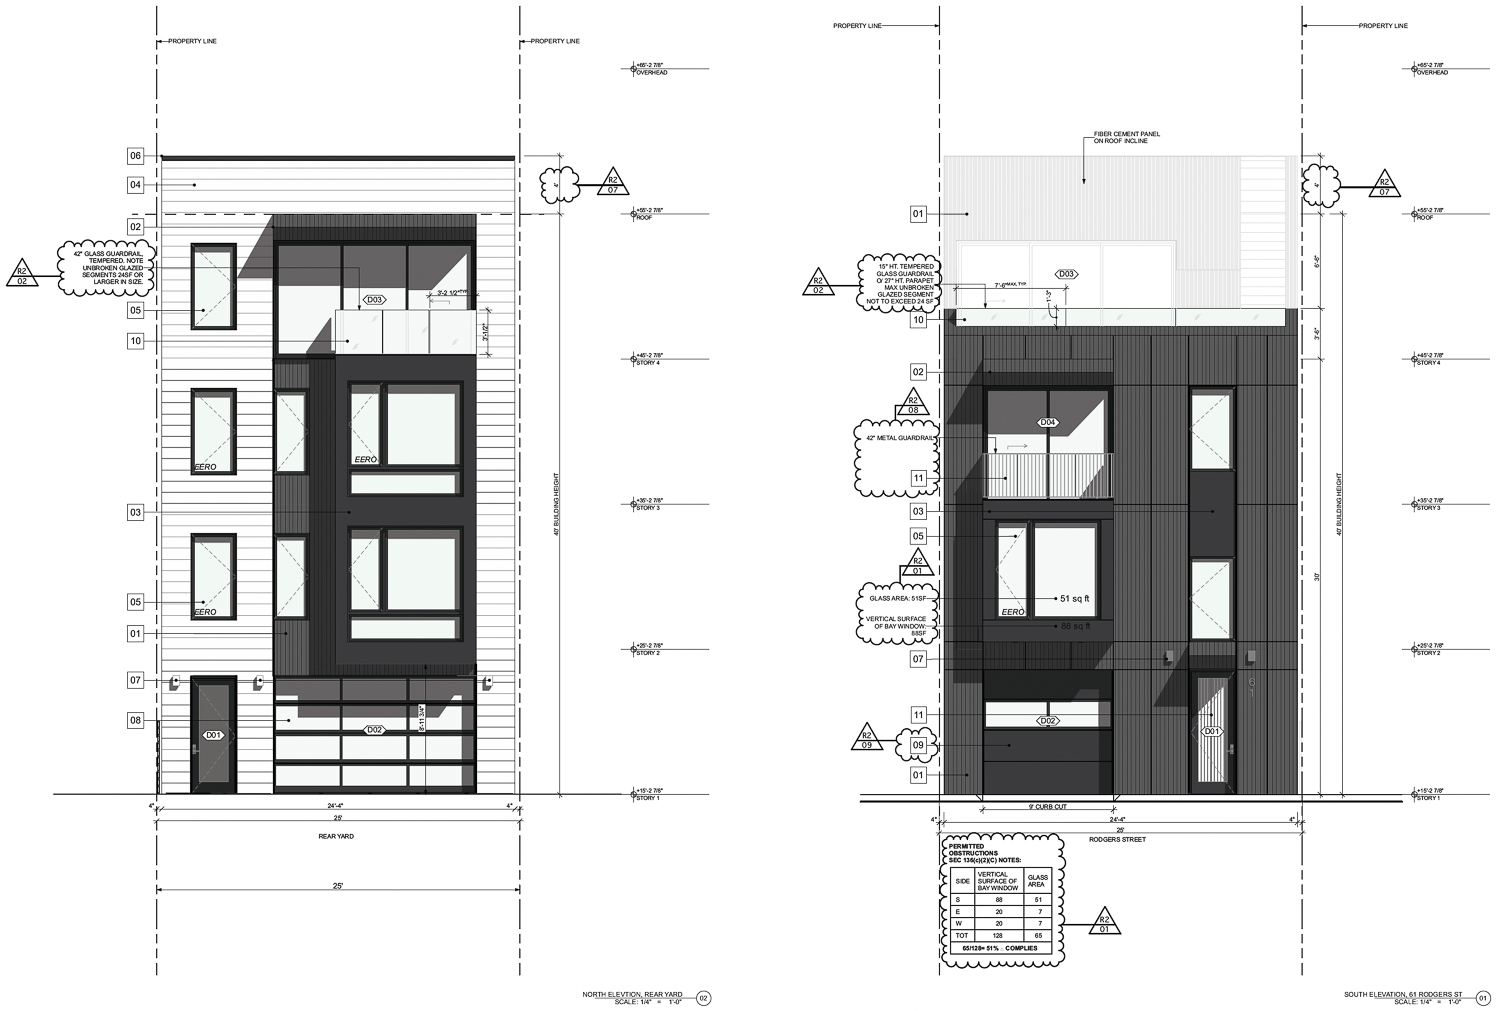 61 Rodgers Street facade elevations, illustration by RG Architecture